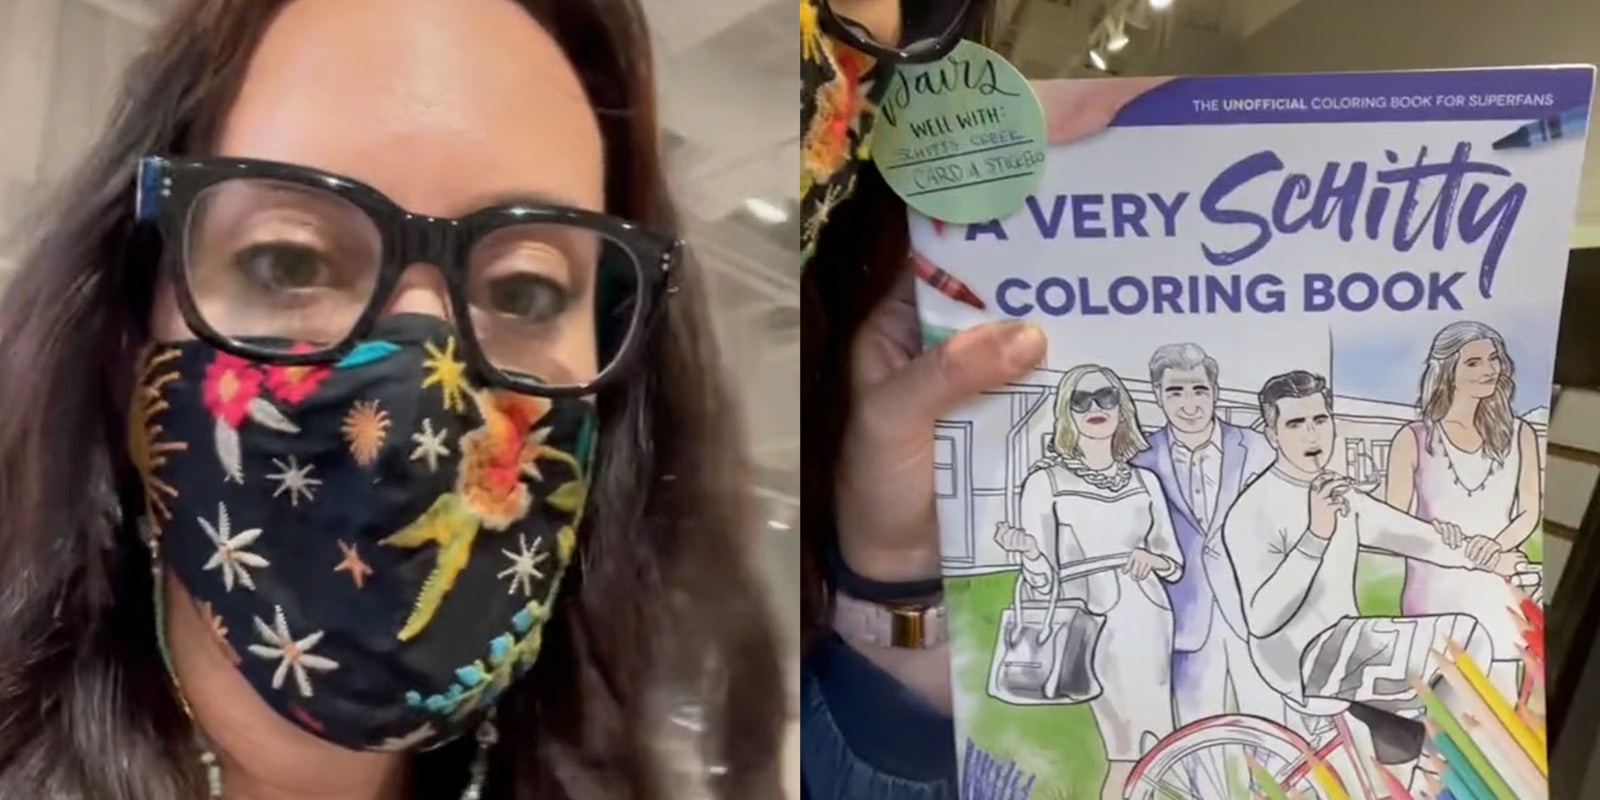 Christina Haberkern shared a video with her book from a Paper Source store